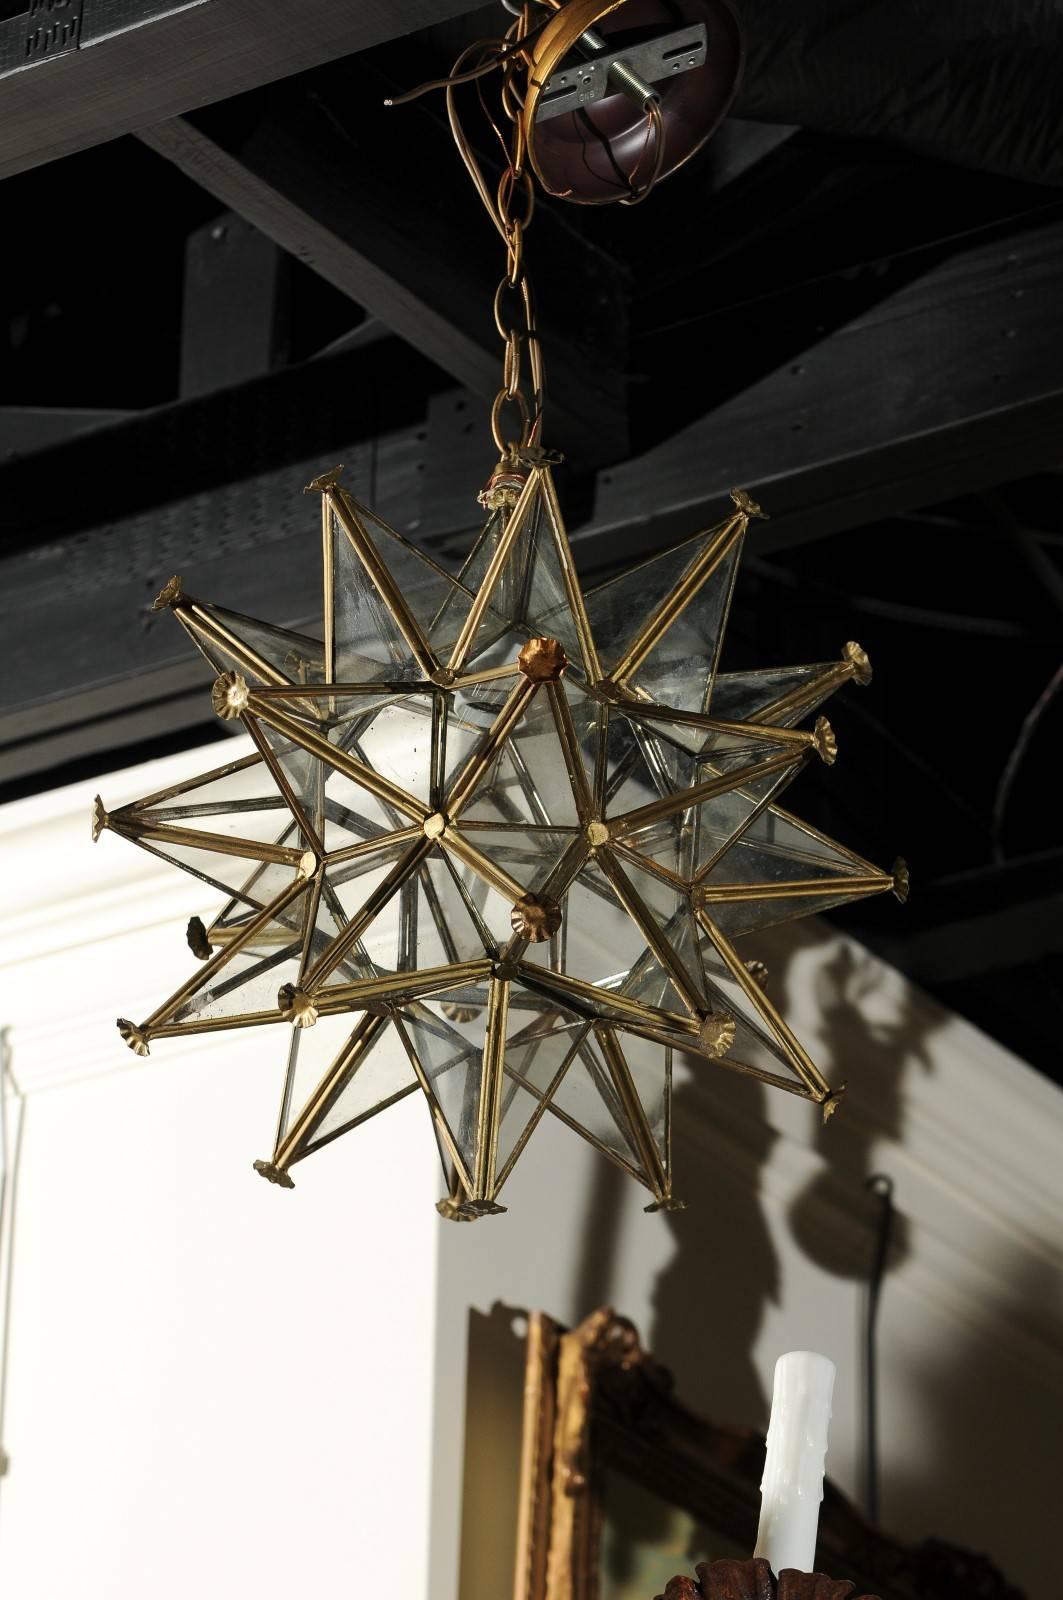 A French vintage star light fixture from the mid-20th century with gilt metal frame and new wiring. This French light fixture features an energizing star shape. A gilt metal frame, accented with delicate flower-shaped cups, secures the various glass